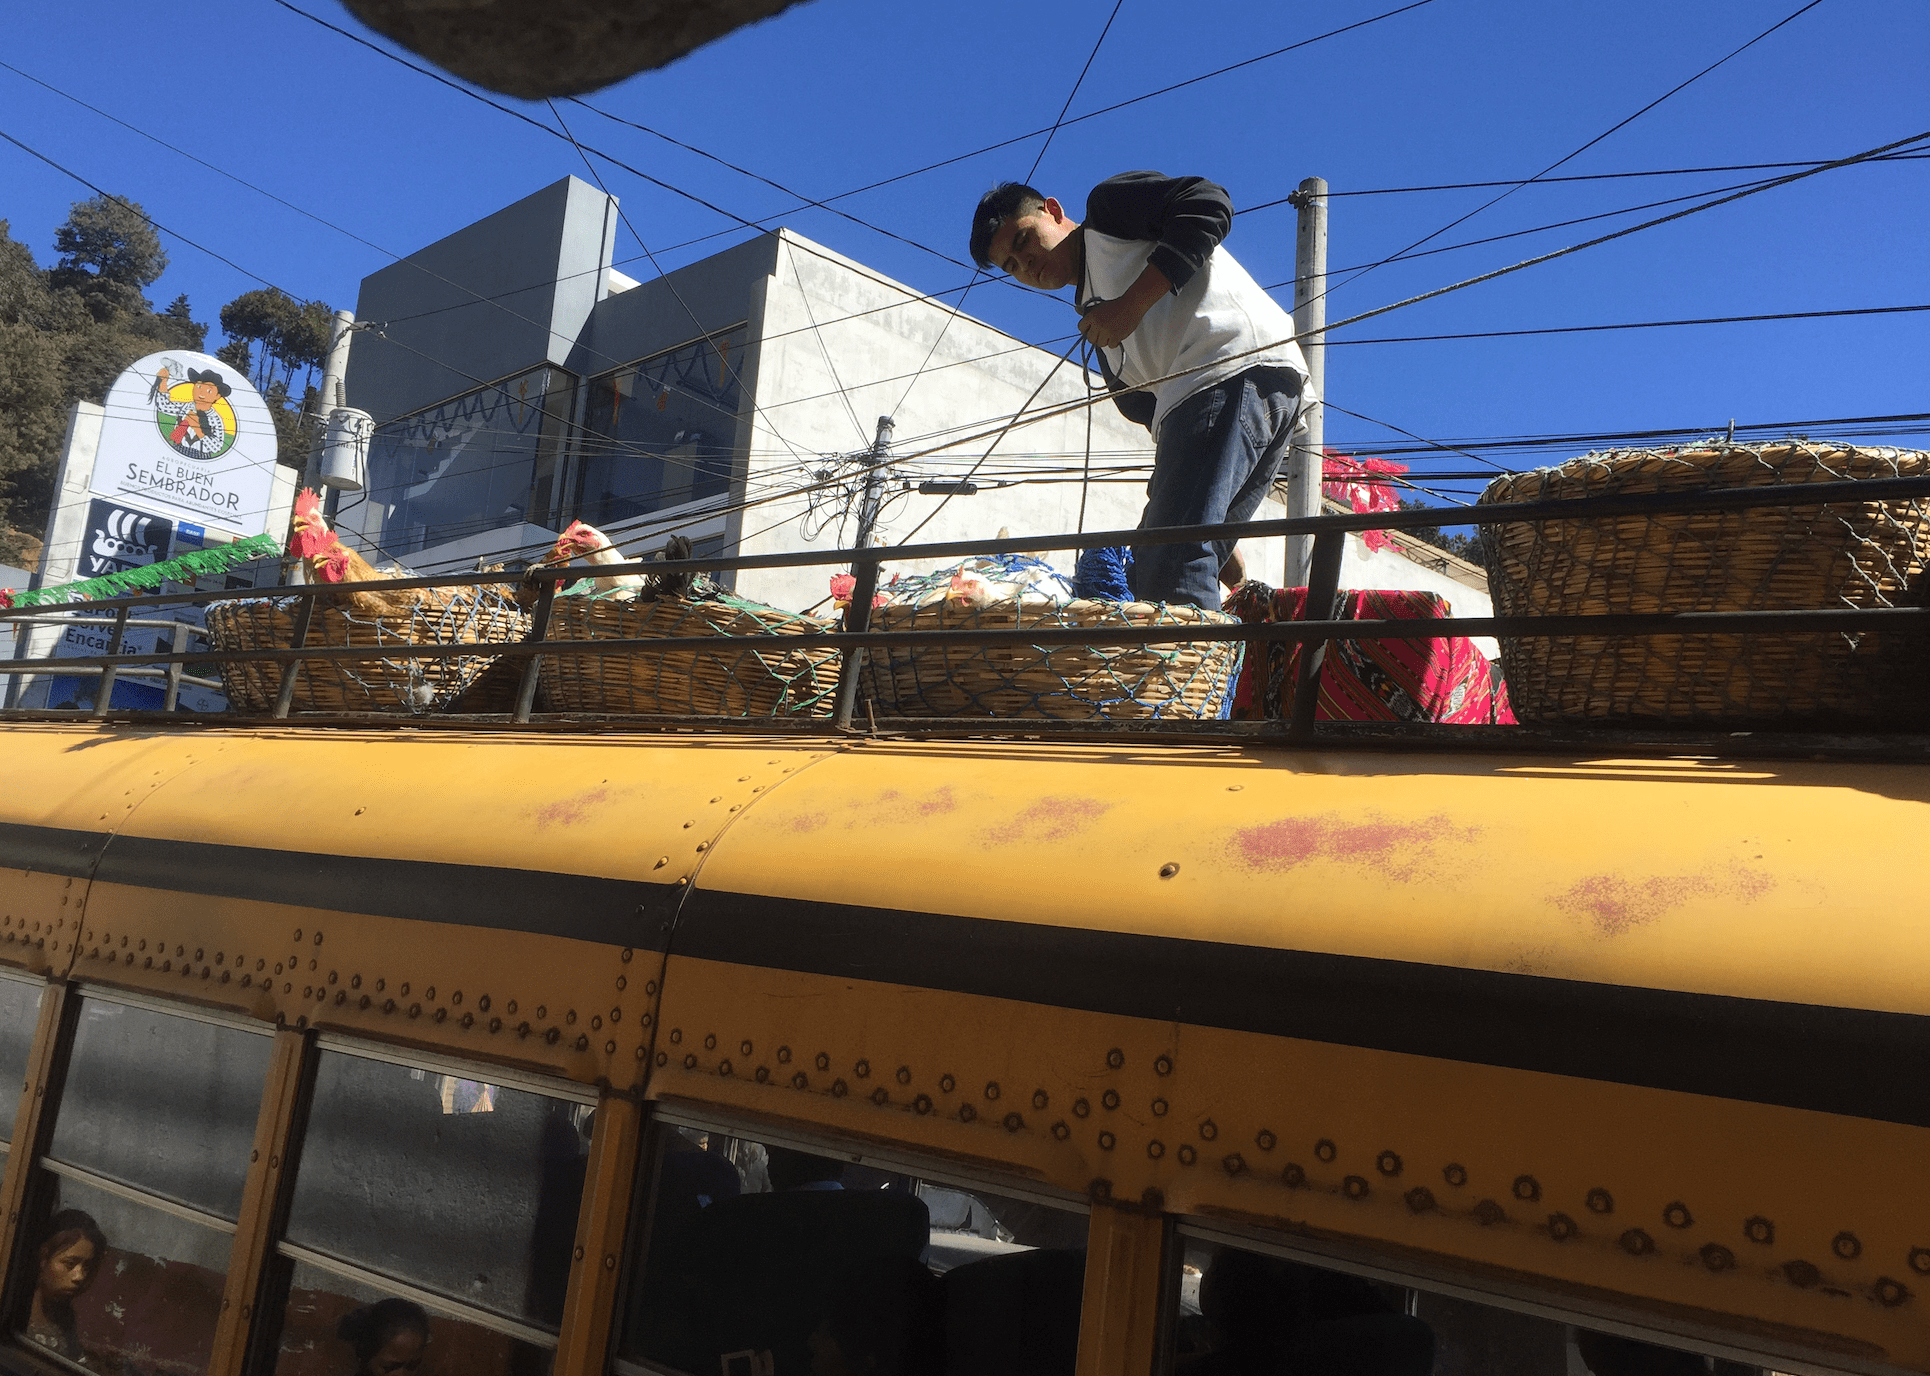 Luggage and chickens alike share the roof rack of the chicken bus.